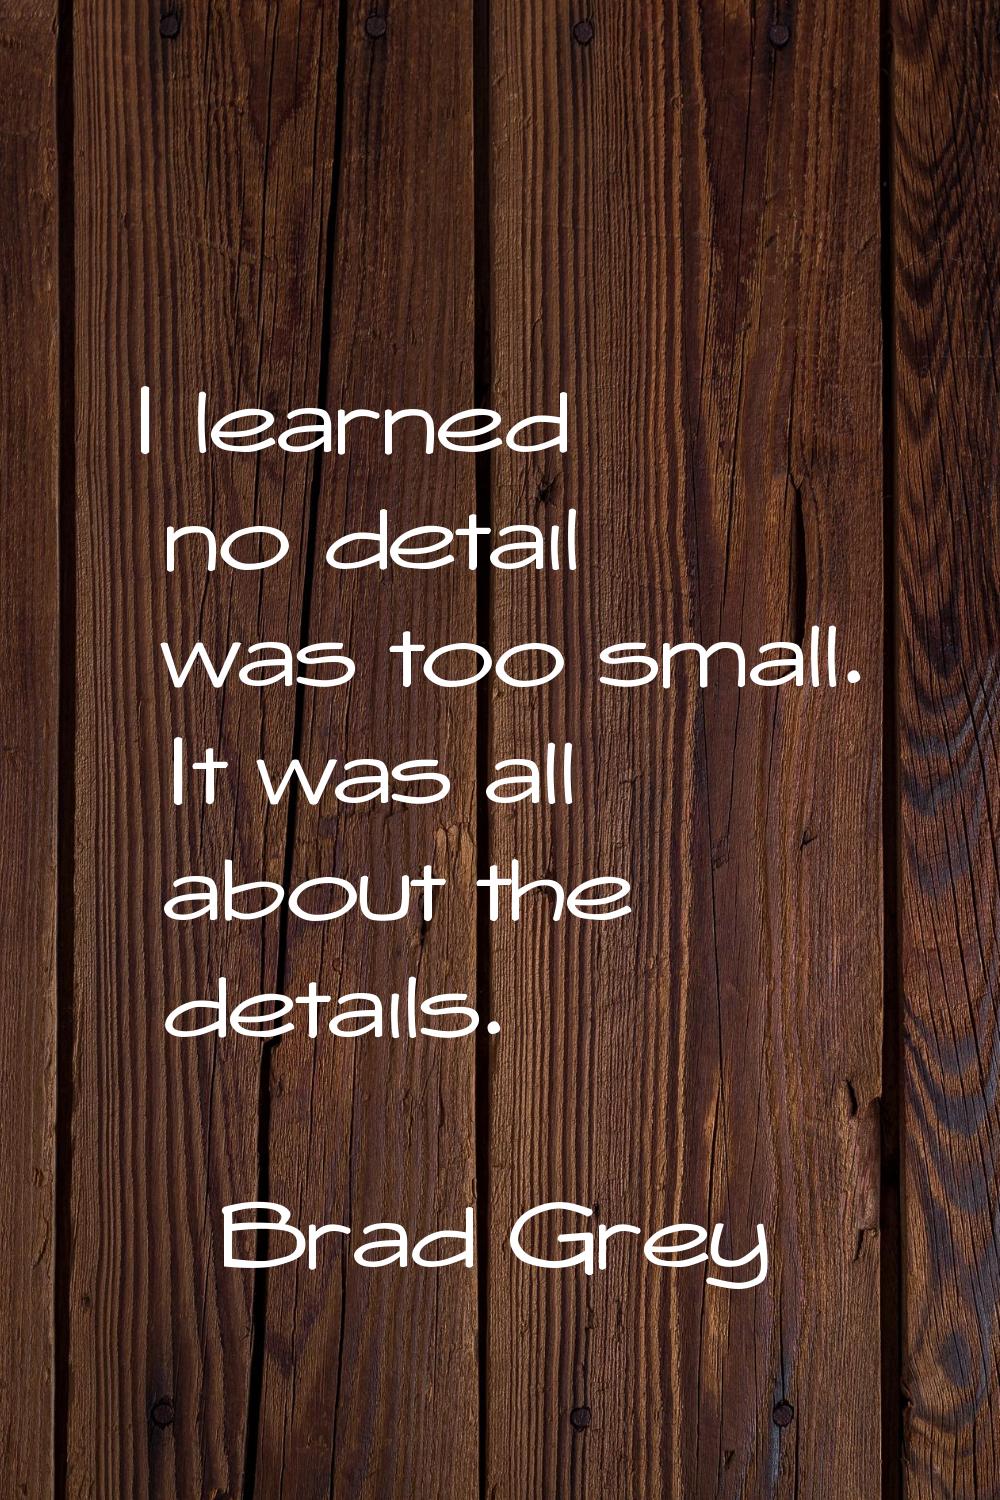 I learned no detail was too small. It was all about the details.